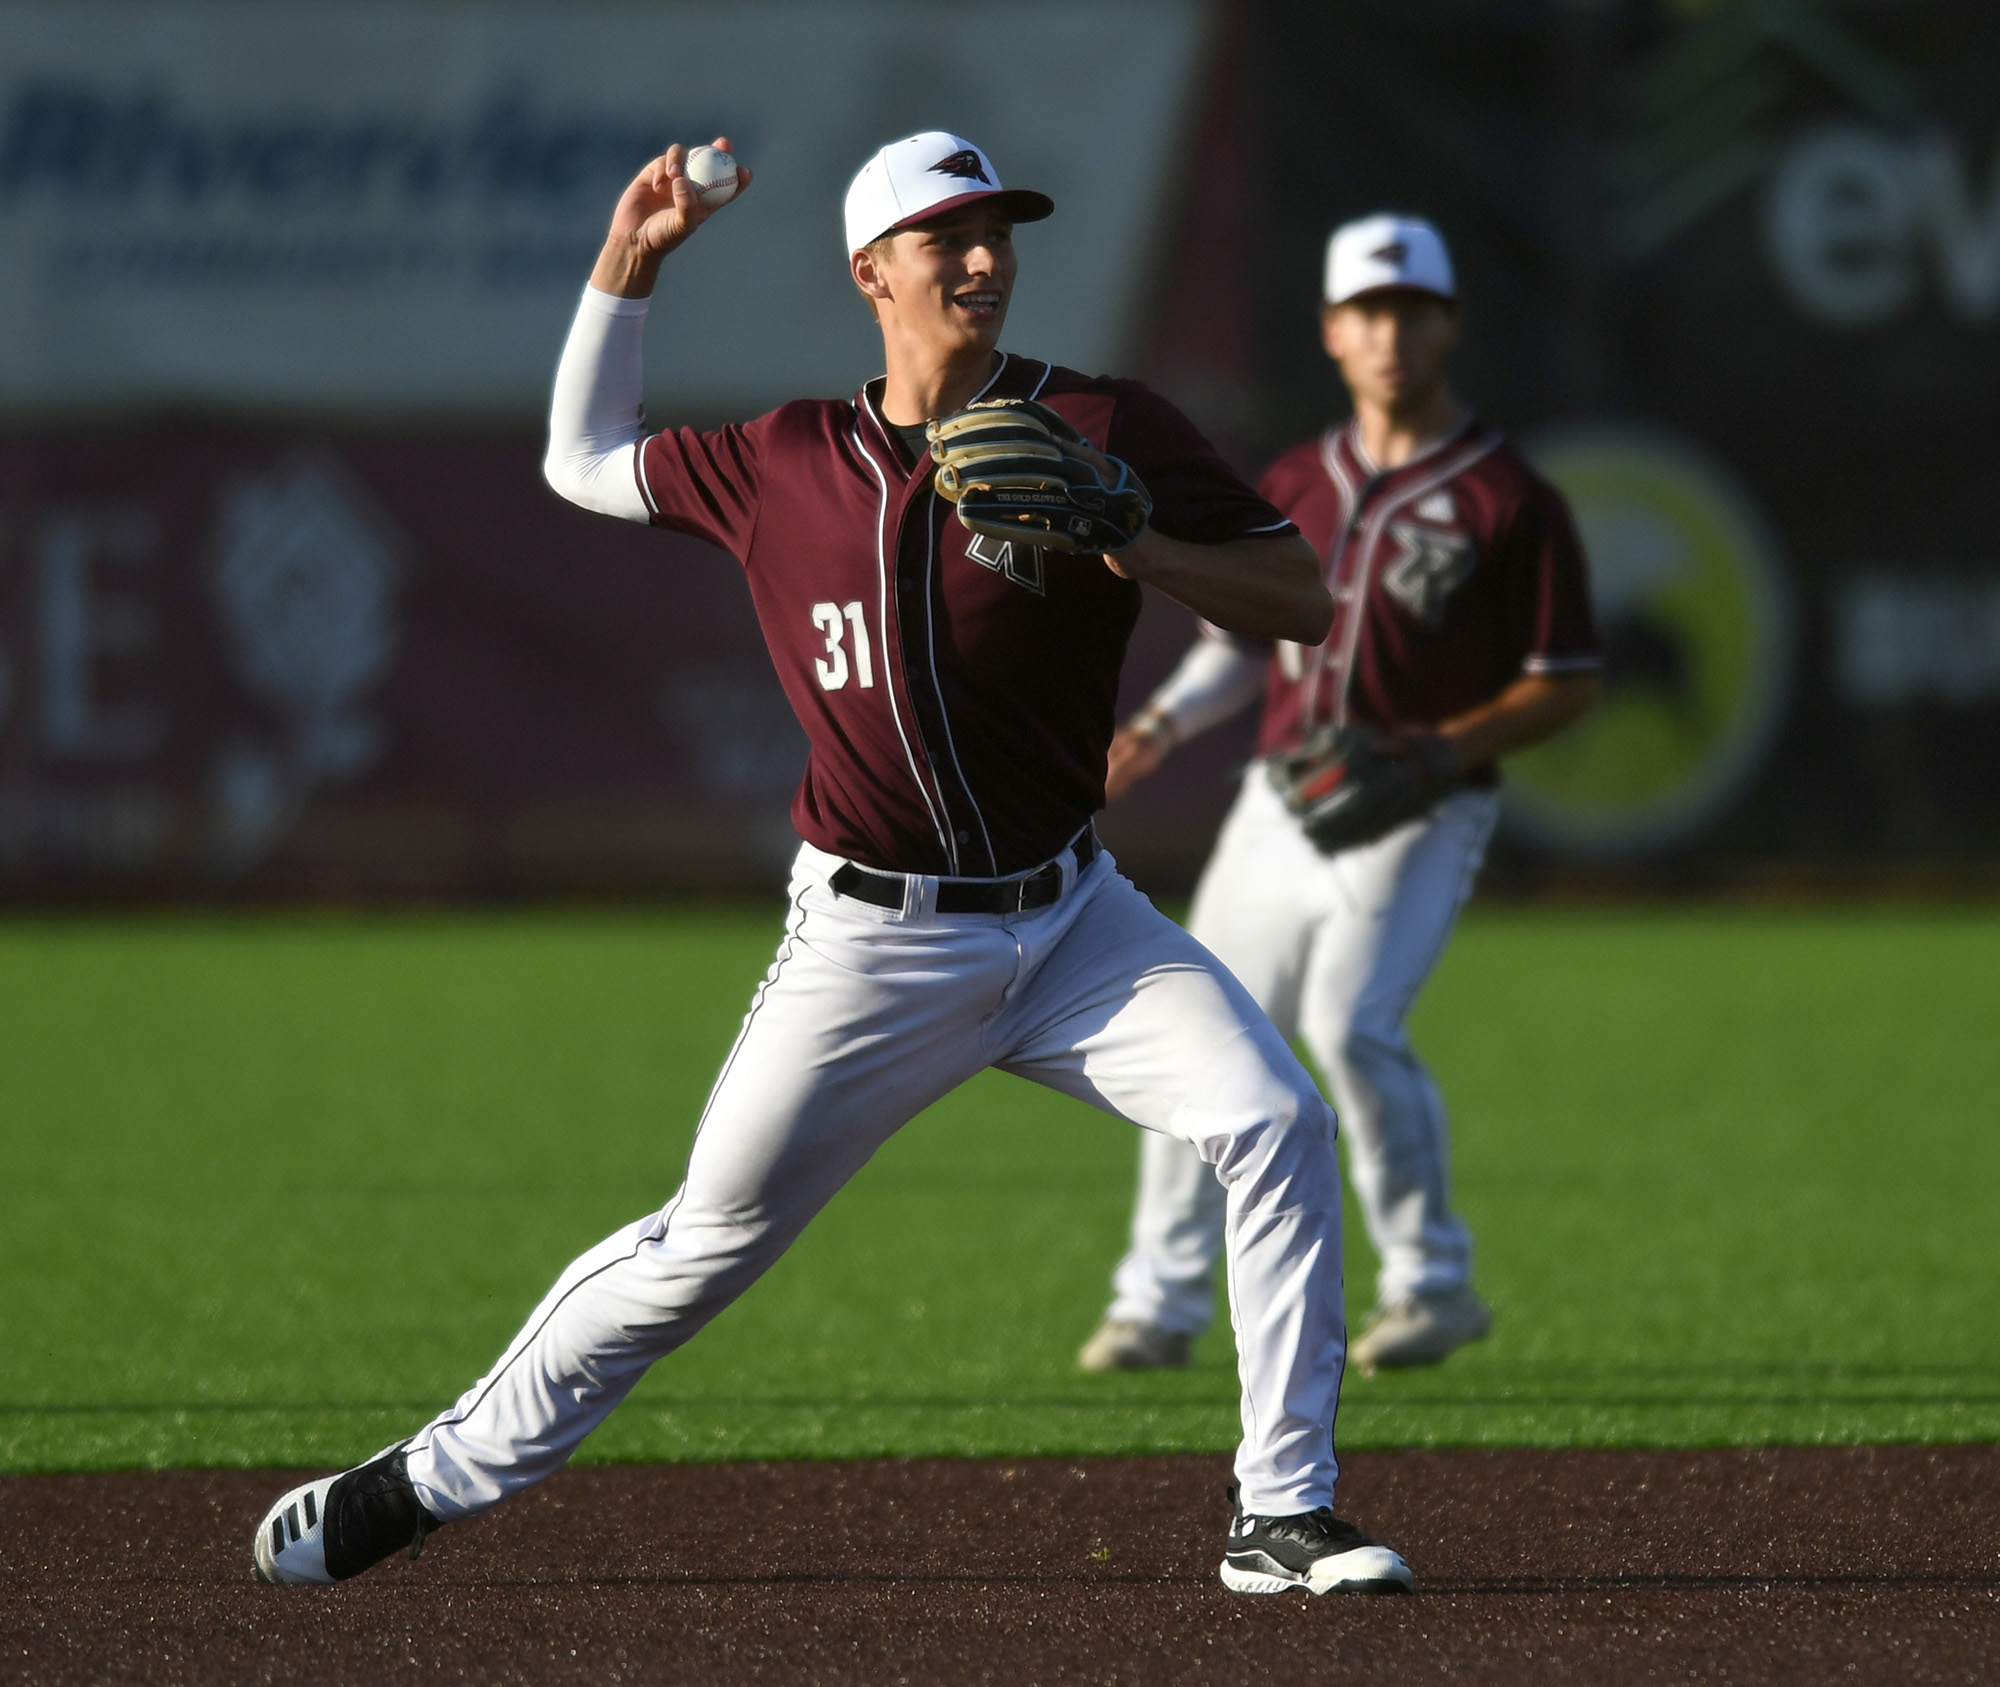 Raptors third baseman Justin Trimble readies to throw the ball Tuesday, June 14, 2022, during a Raptors game against the Edmonton Riverhawks at the Ridgefield Outdoor Recreation Complex.